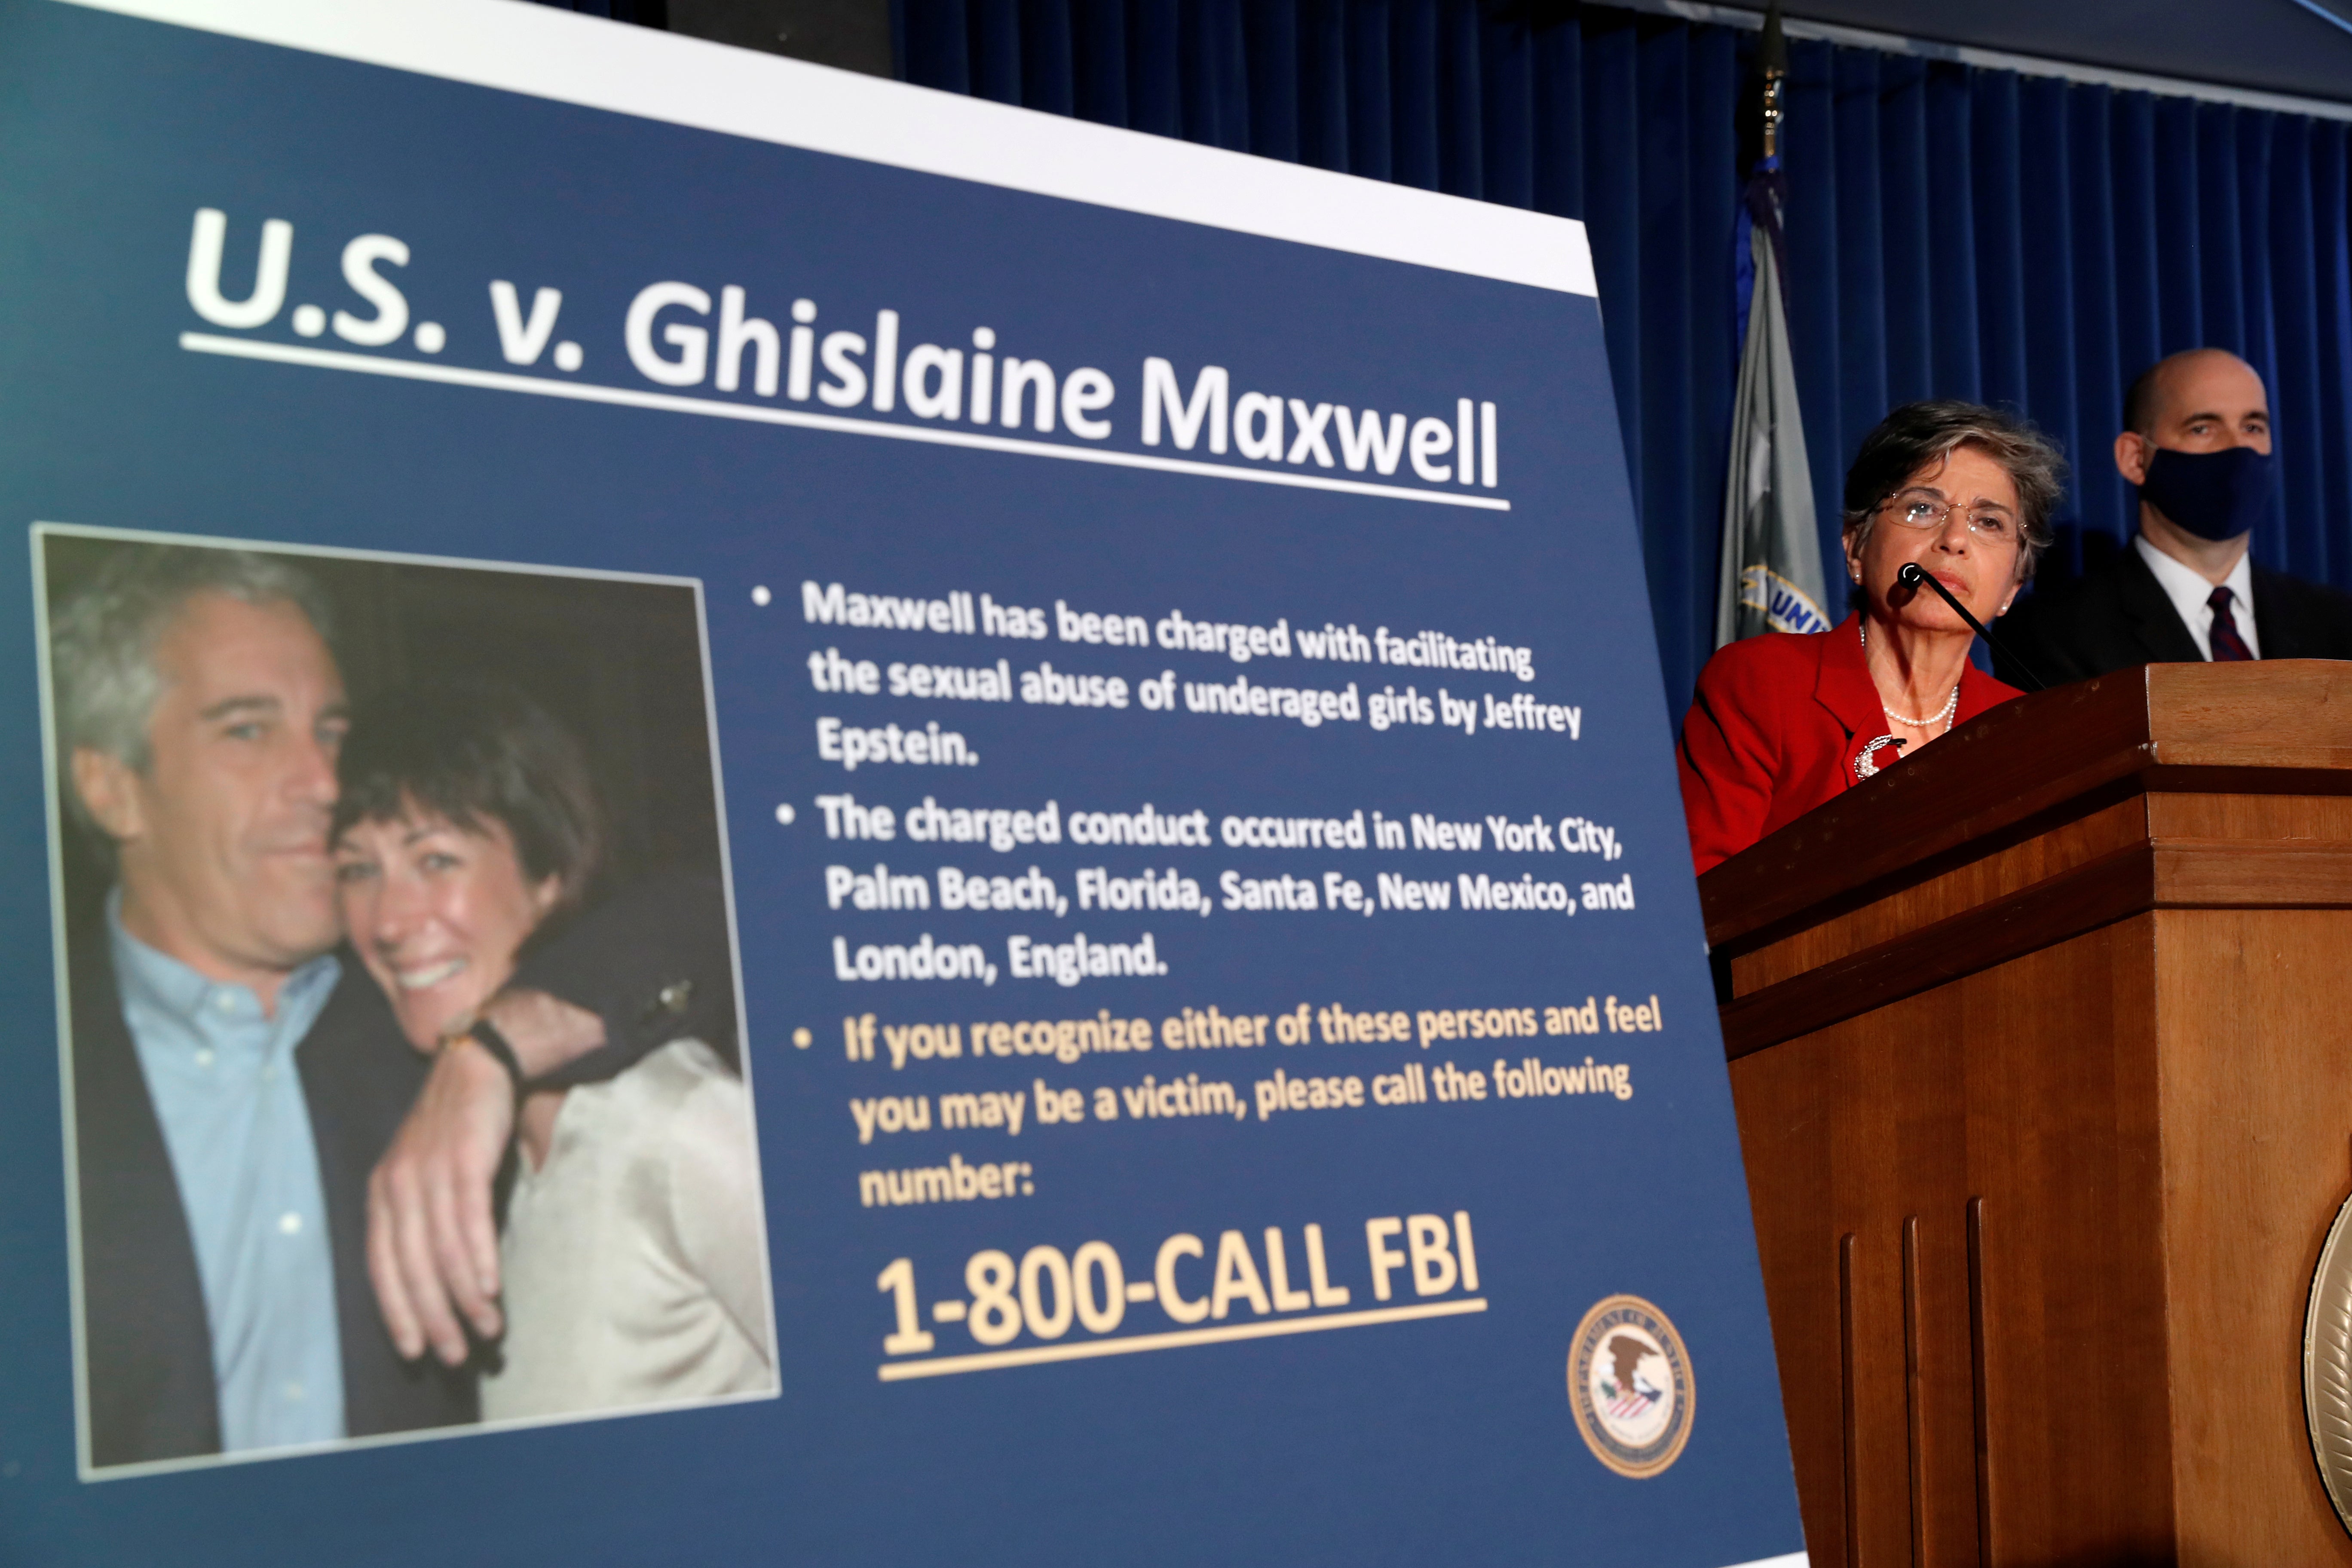 Audrey Strauss, Acting United States Attorney for the Southern District of New York, announced charges on 2 July 2020 against Ghislaine Maxwell for her alleged role in the sexual exploitation and abuse of minor girls by Jeffrey Epstein.